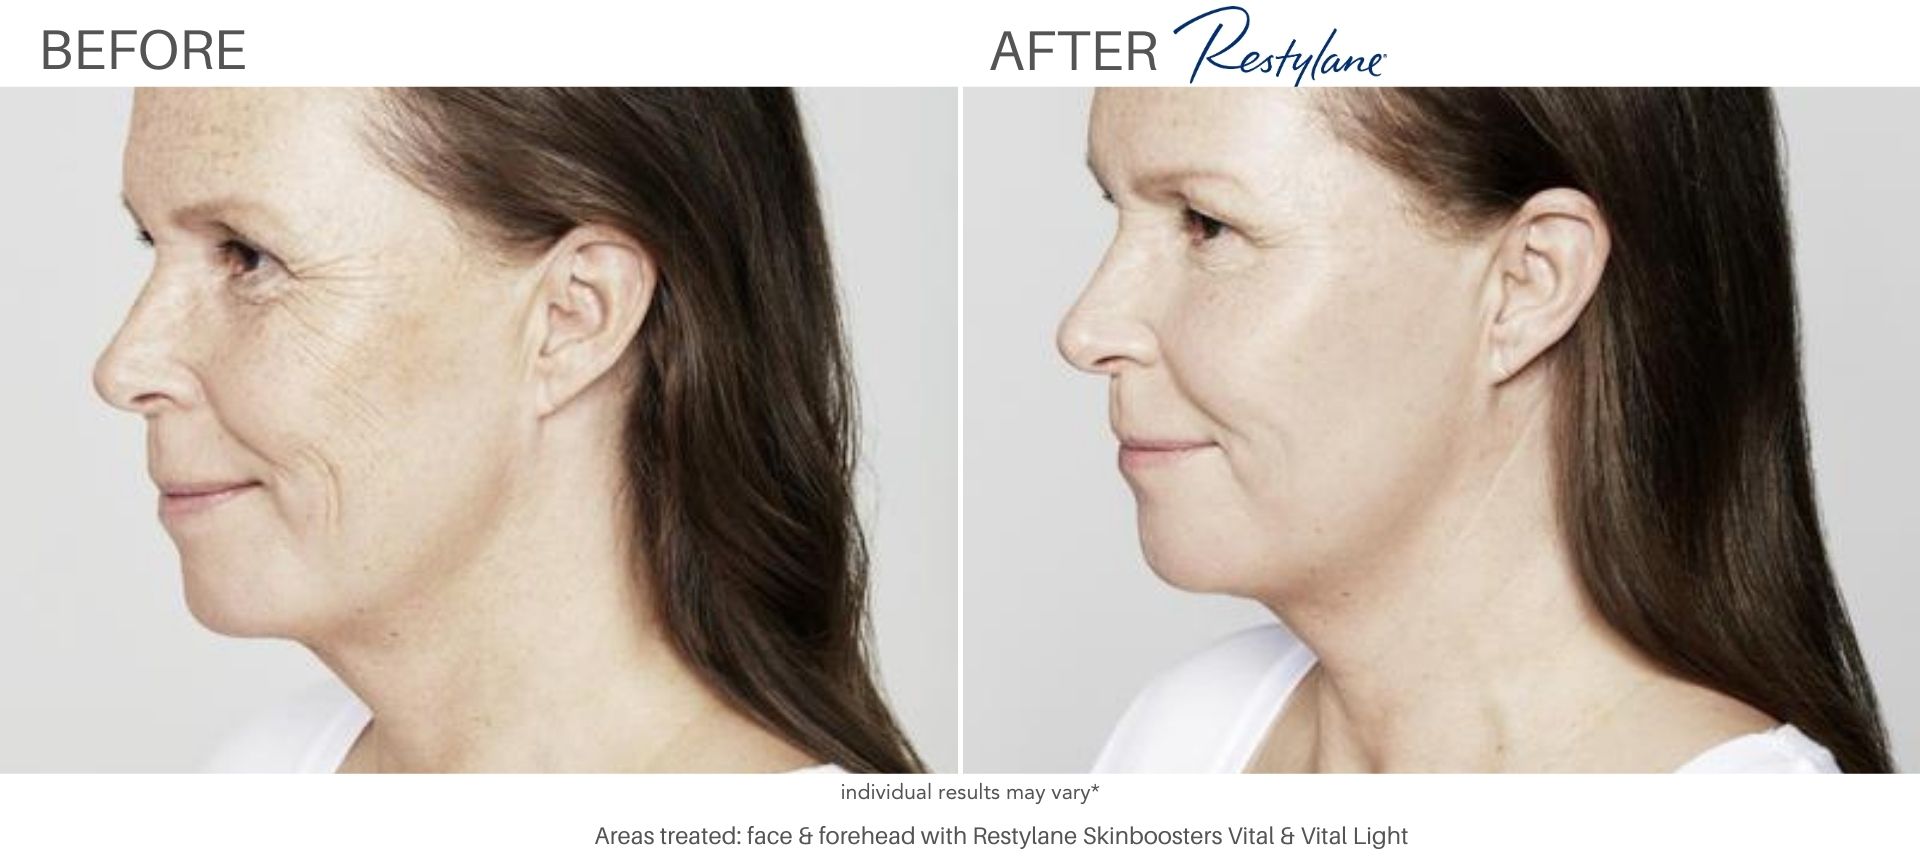 Woman's before and after results from Juvederm.